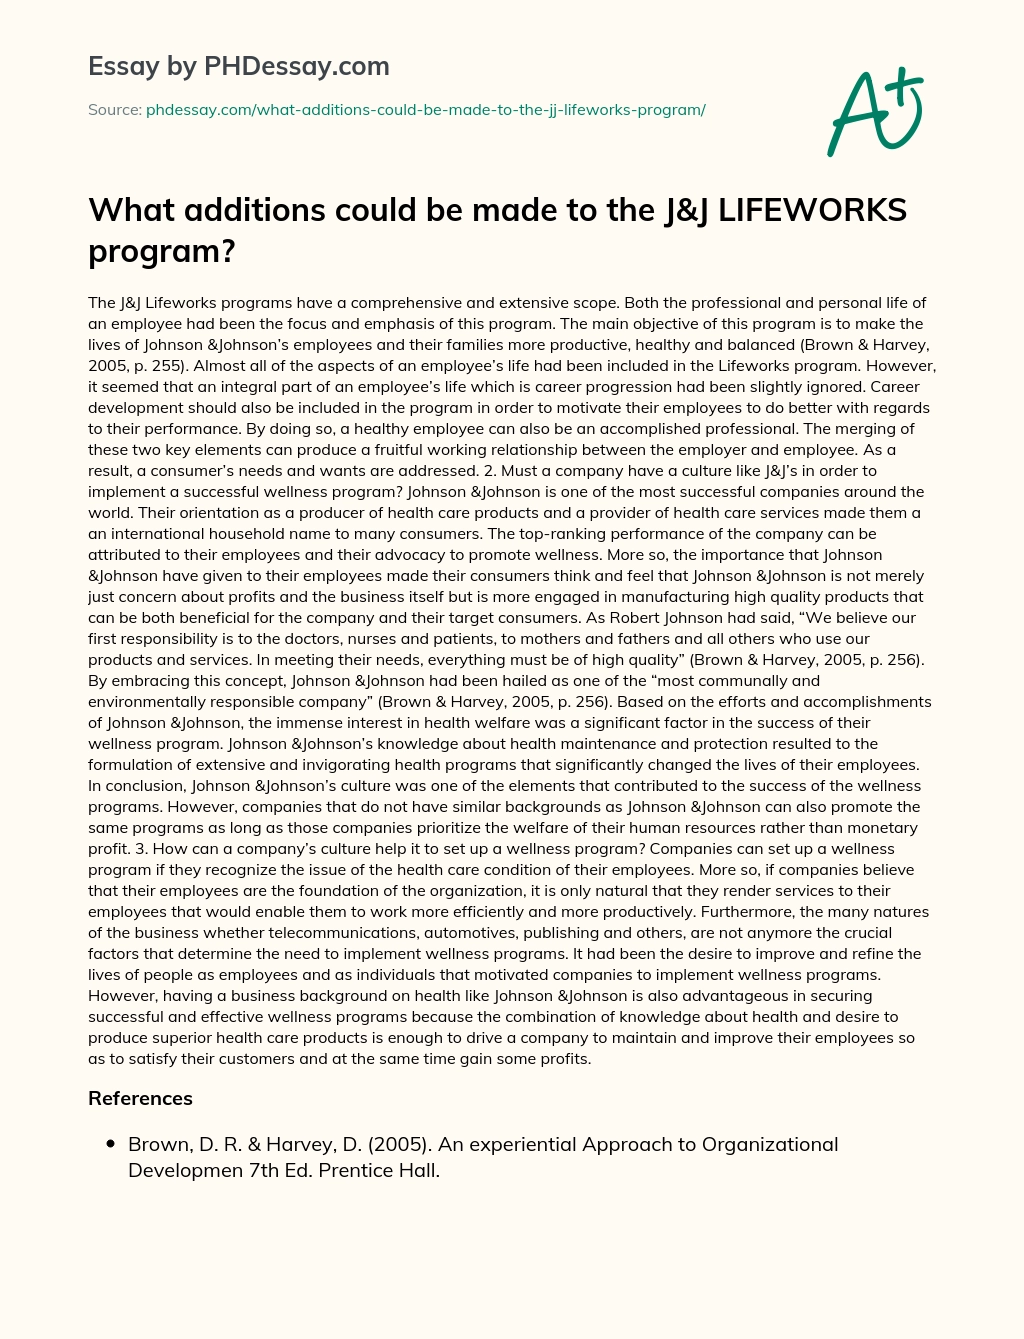 What additions could be made to the J&J LIFEWORKS program? essay